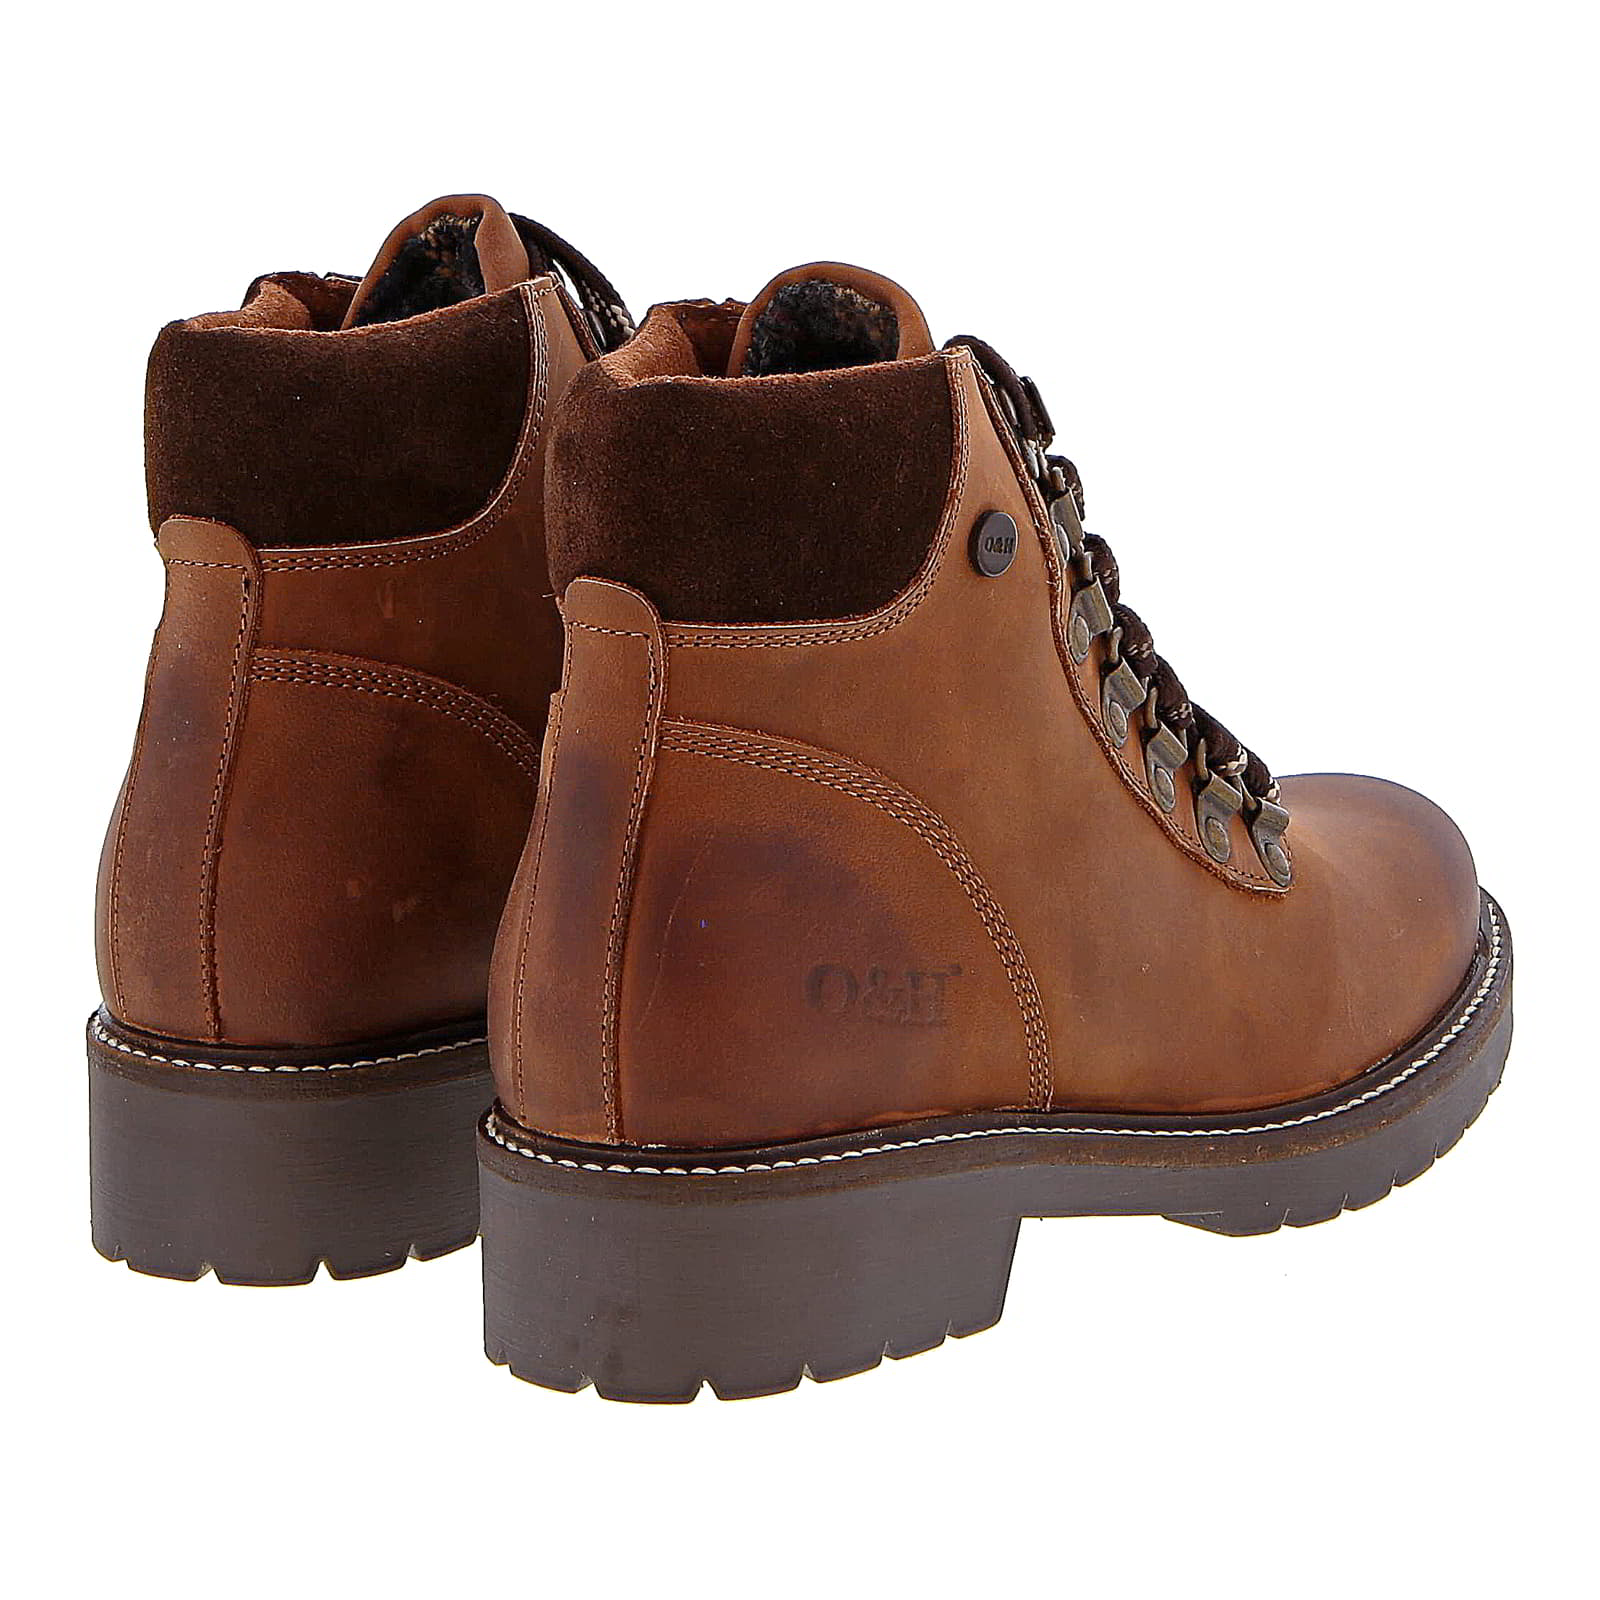 Womens Sierra Nevada Leather Hiker Ankle Boots - Cognac